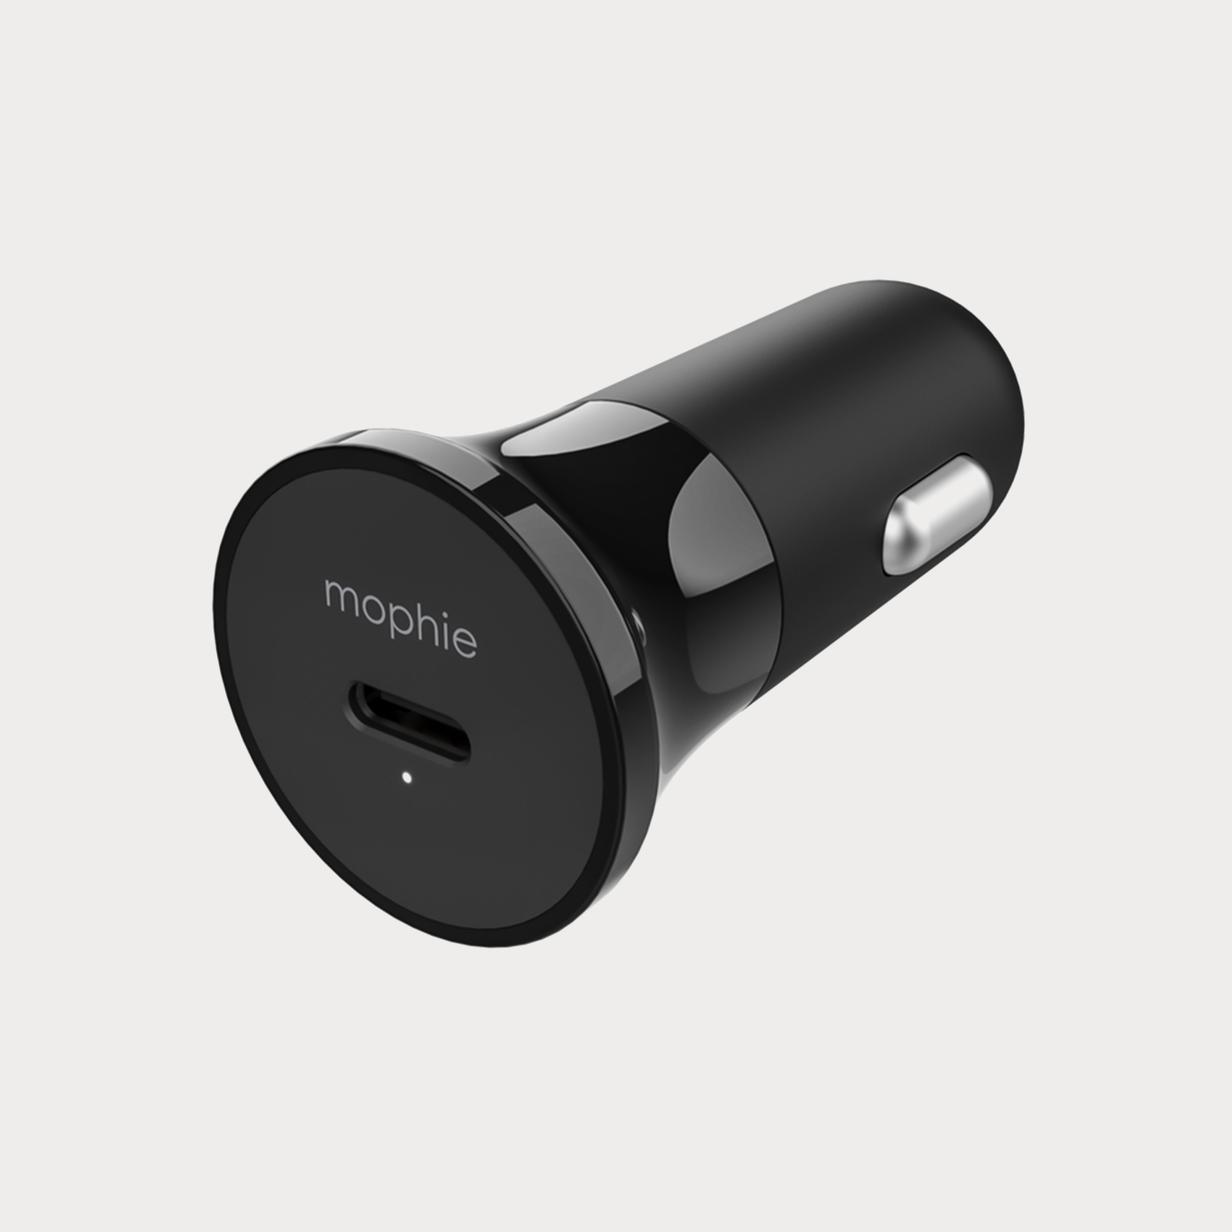 Mophie 409905969 Single Port 18 W Car Charger USB C PD Adapter 01